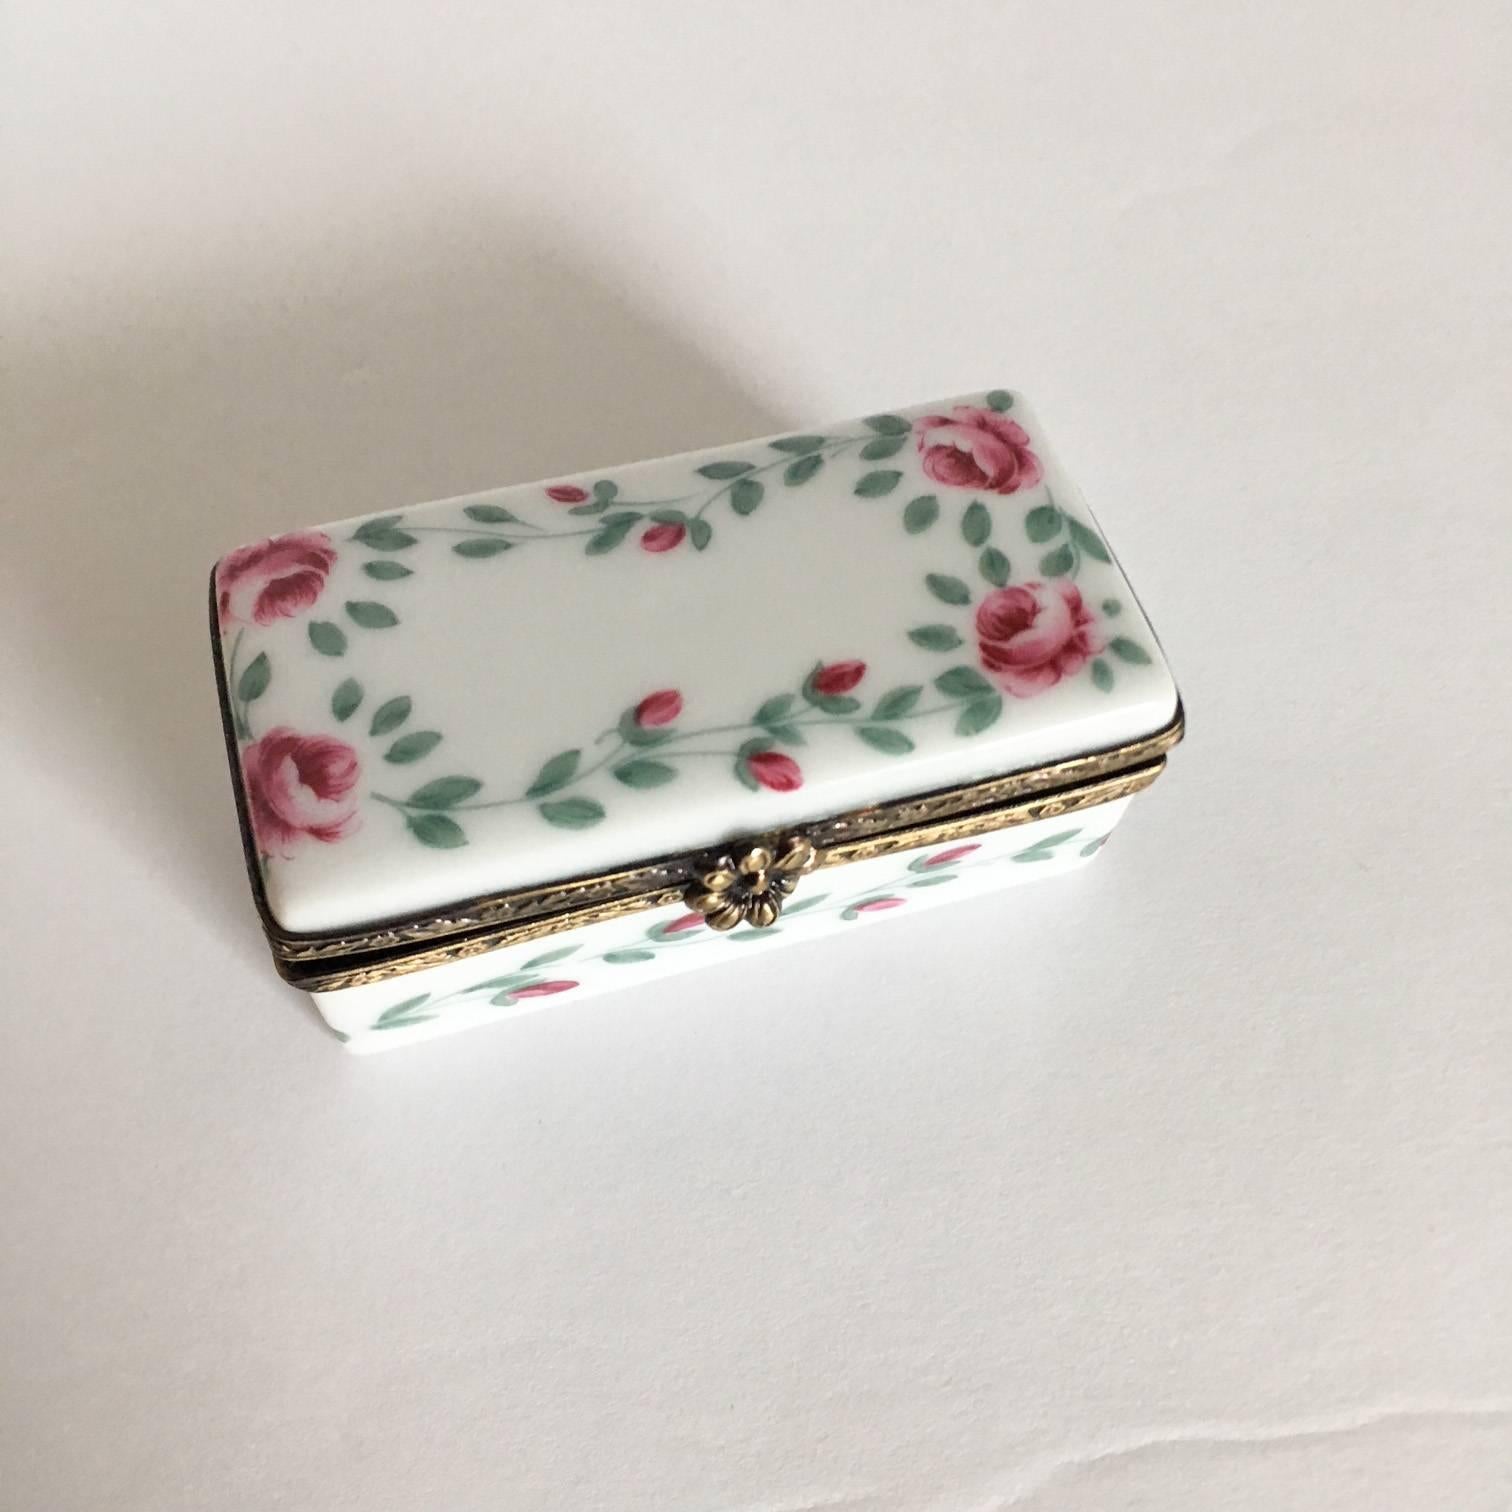 French Provincial Limoges Rose Box with Pink High Heels